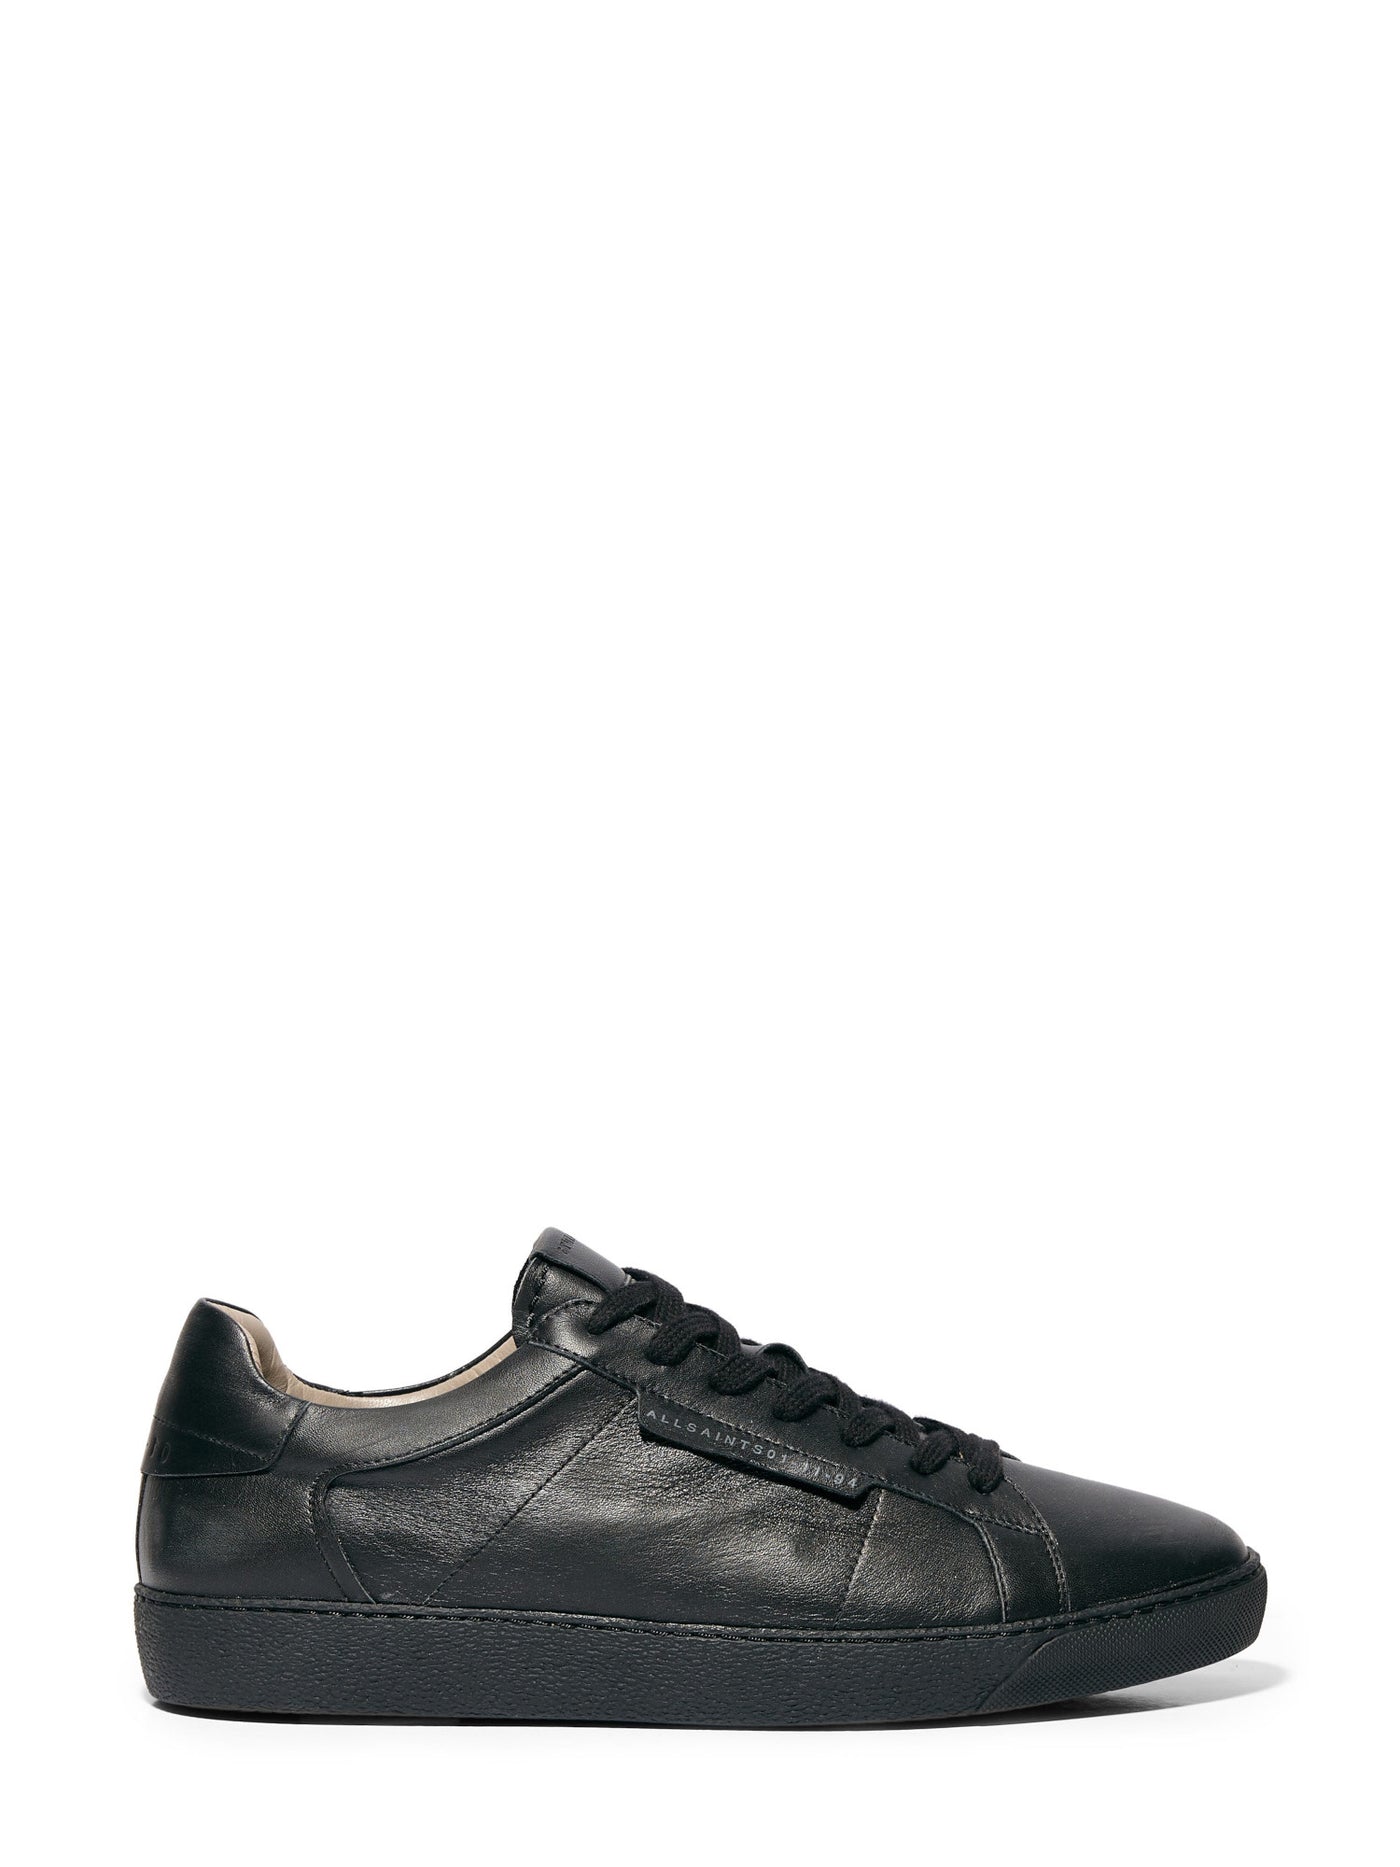 ALLSAINTS Mens Black Removable Insole Logo Sheer Round Toe Platform Lace-Up Leather Athletic Sneakers 44